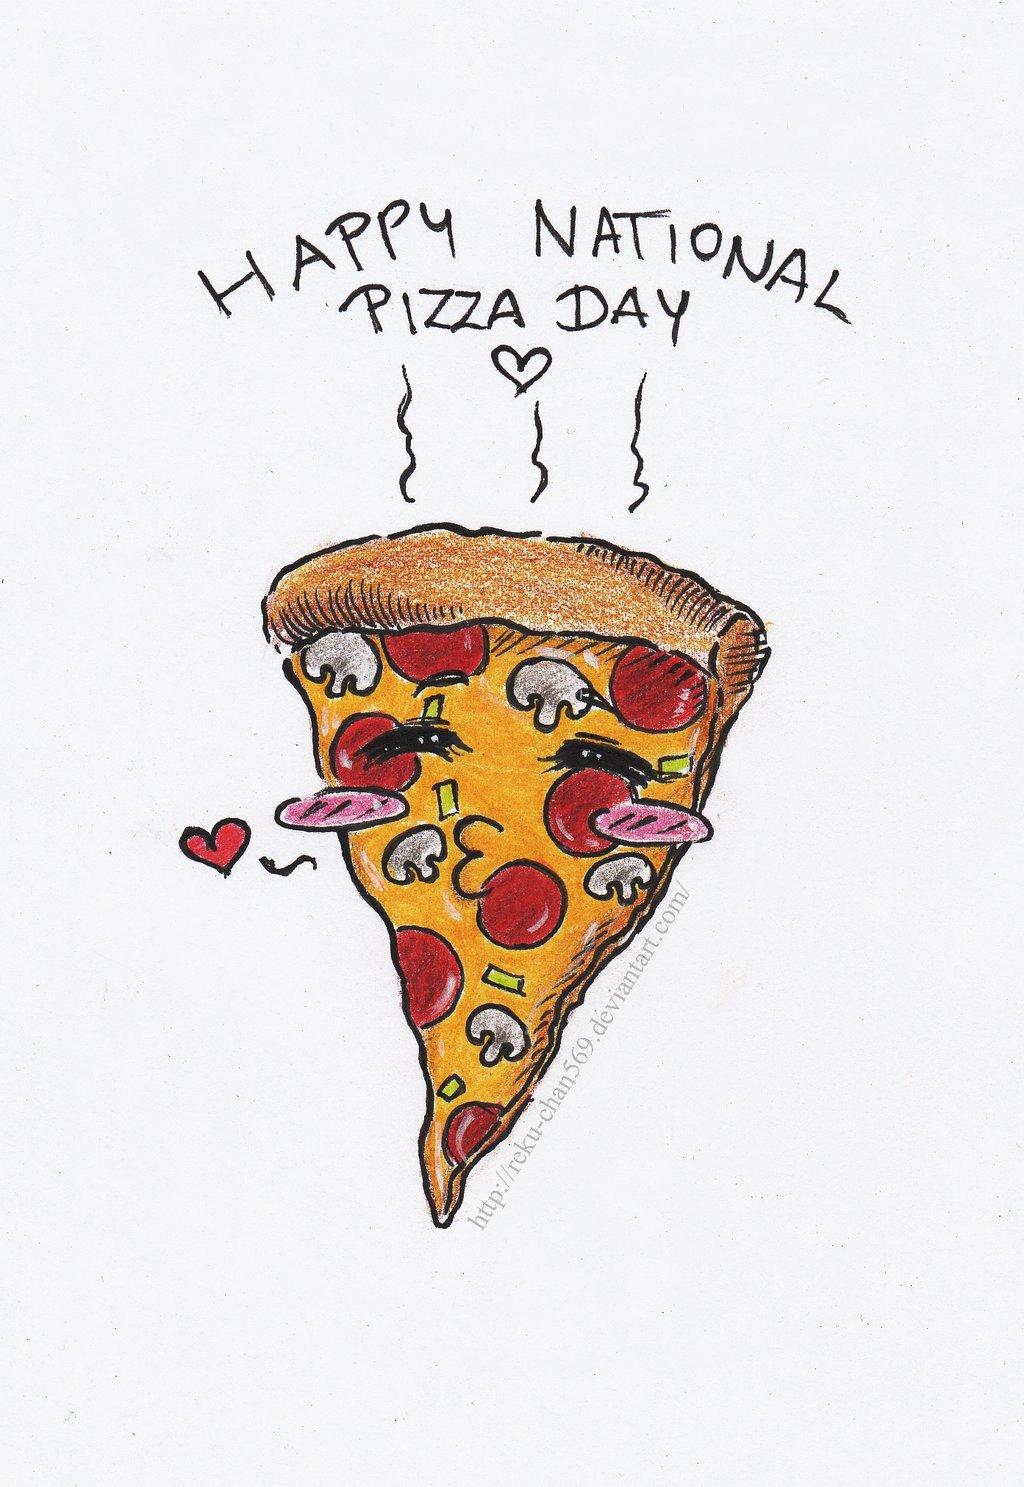 National Pizza Day Wallpaper